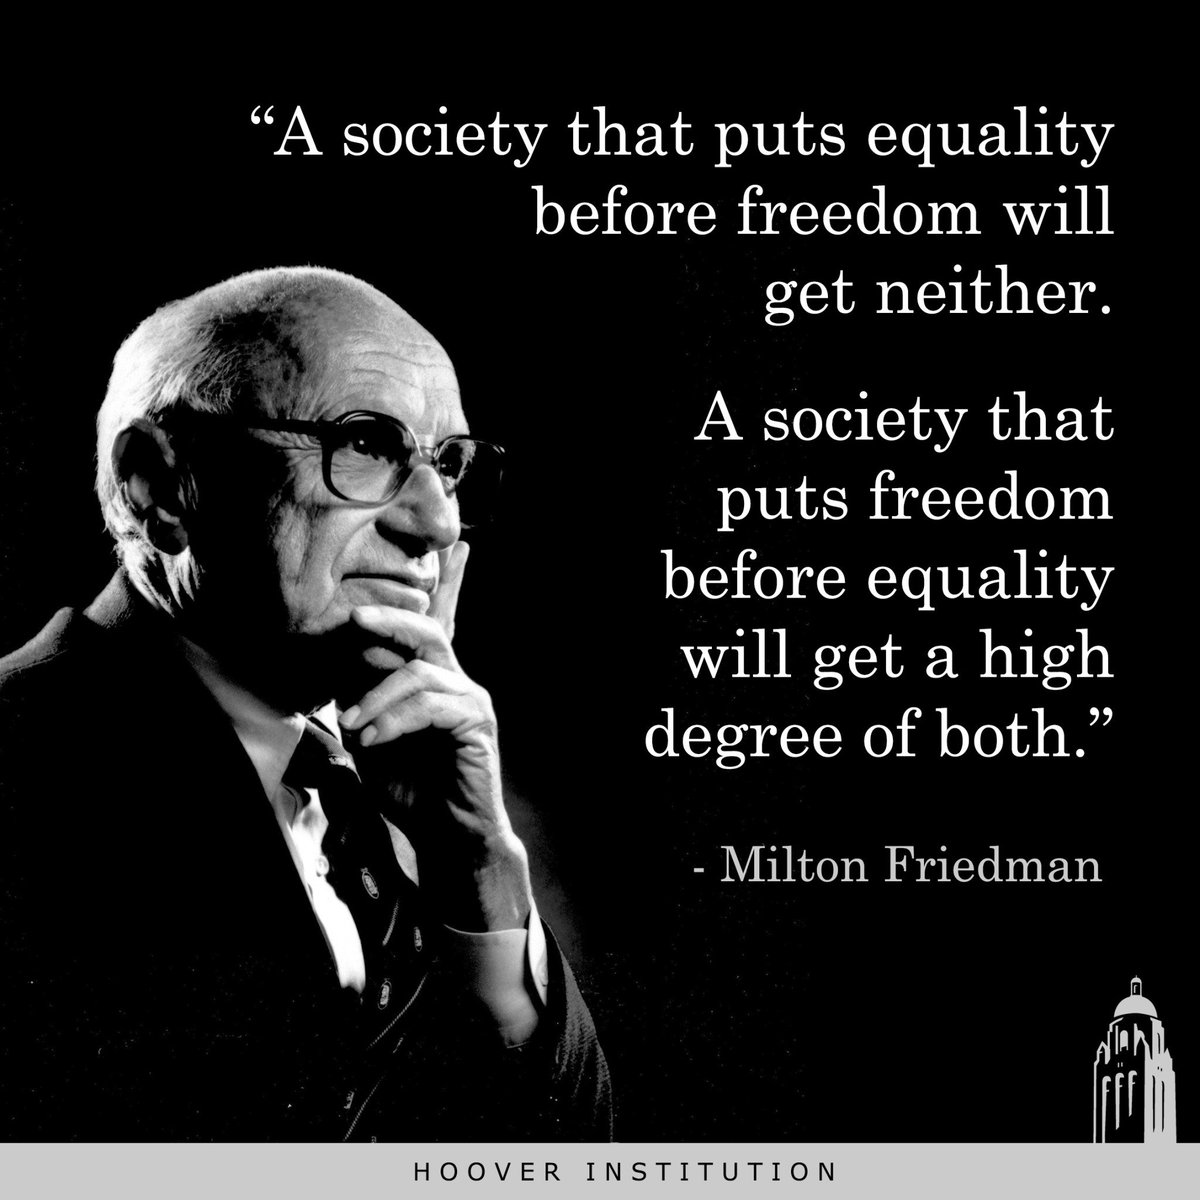 Hoover Institution on Twitter: ""...A society that puts freedom before equality will get a high degree of both." -Milton Friedman… "